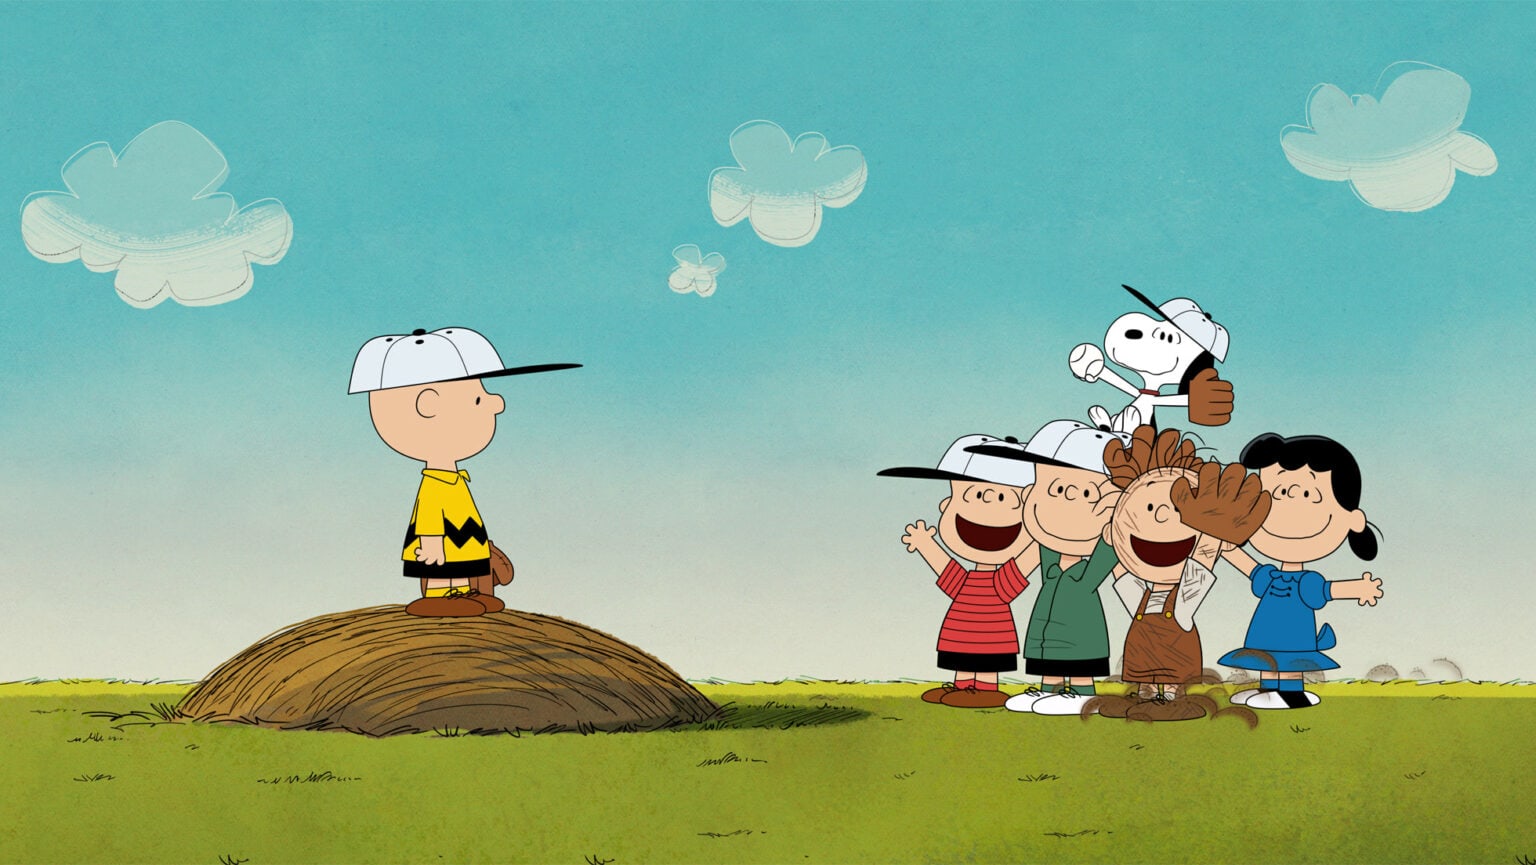 Get ready for loads more Peanuts, Charlie Brown -- coming soon to Apple TV+.